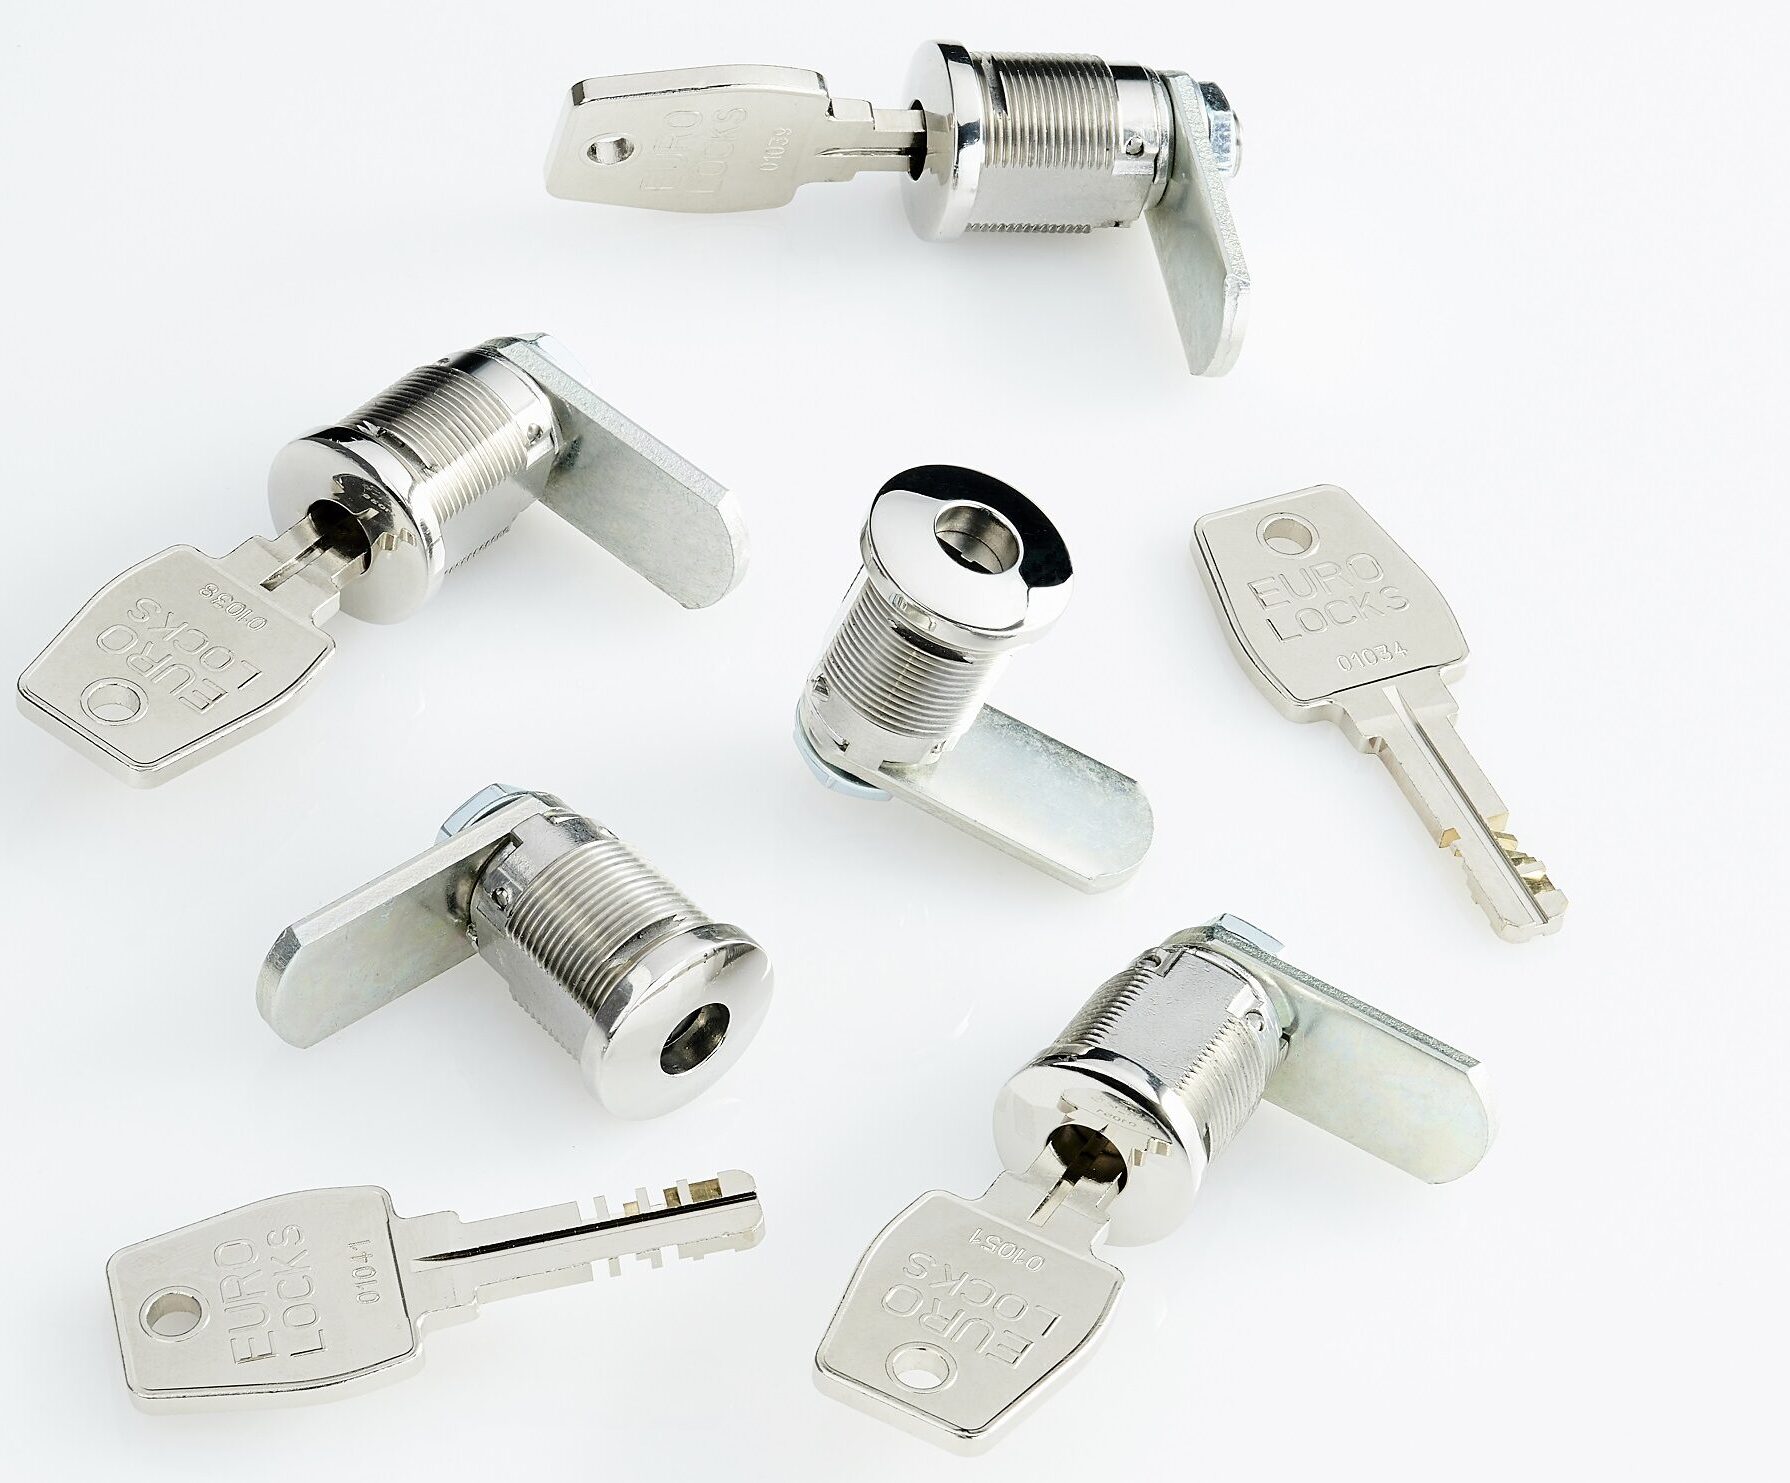 High Security Lock range now available from Euro-Locks